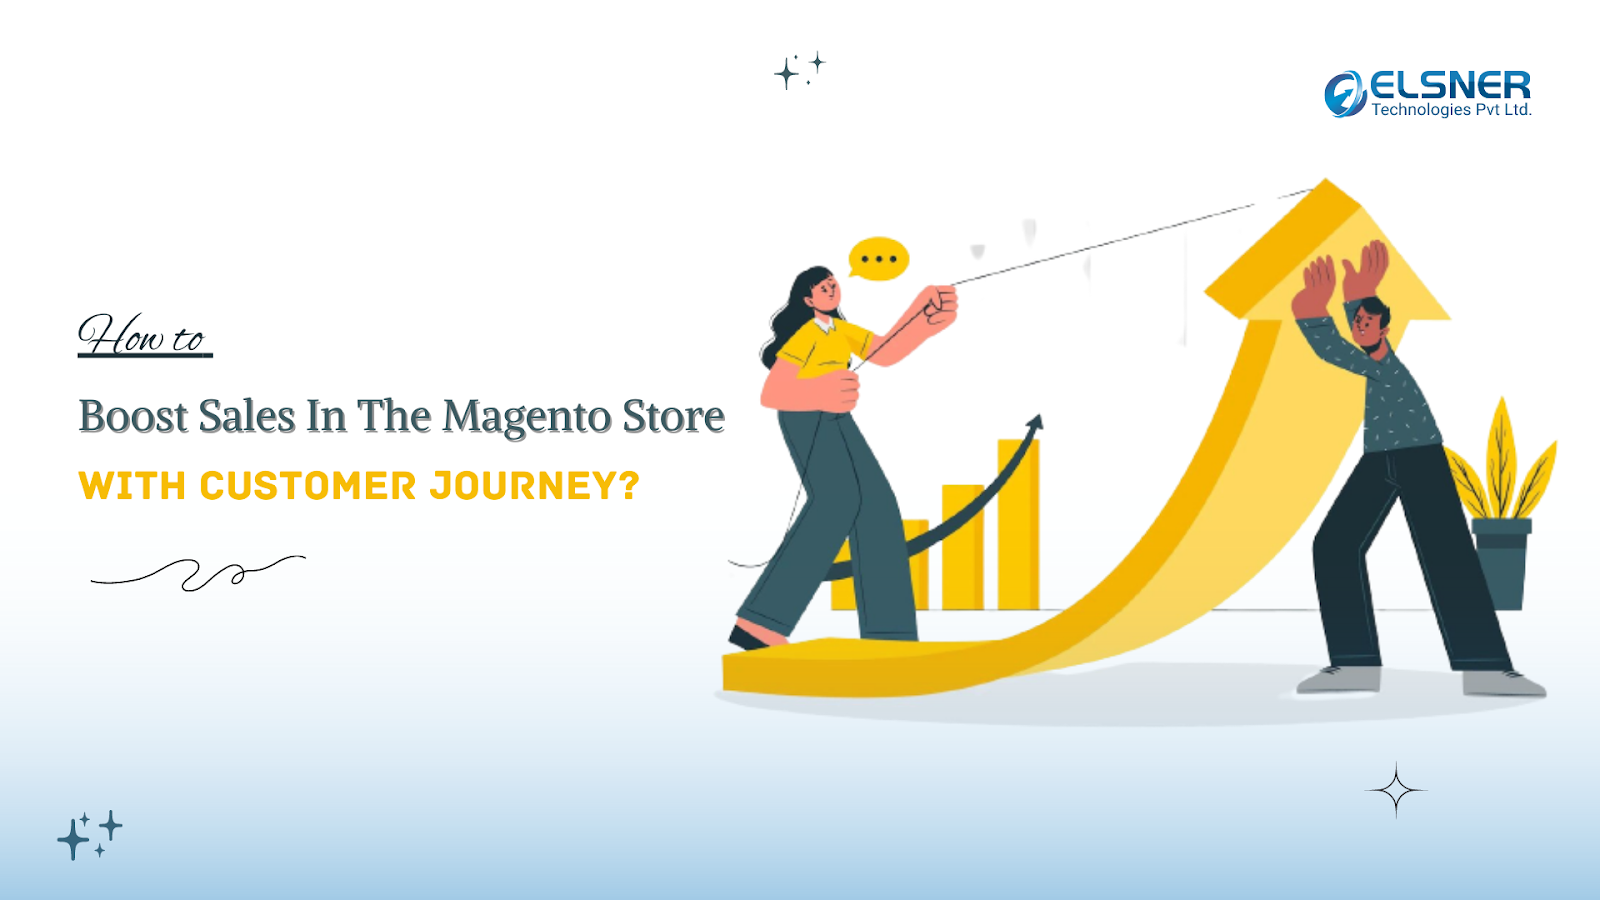 How to boost sales in the Magento store with customer journey?